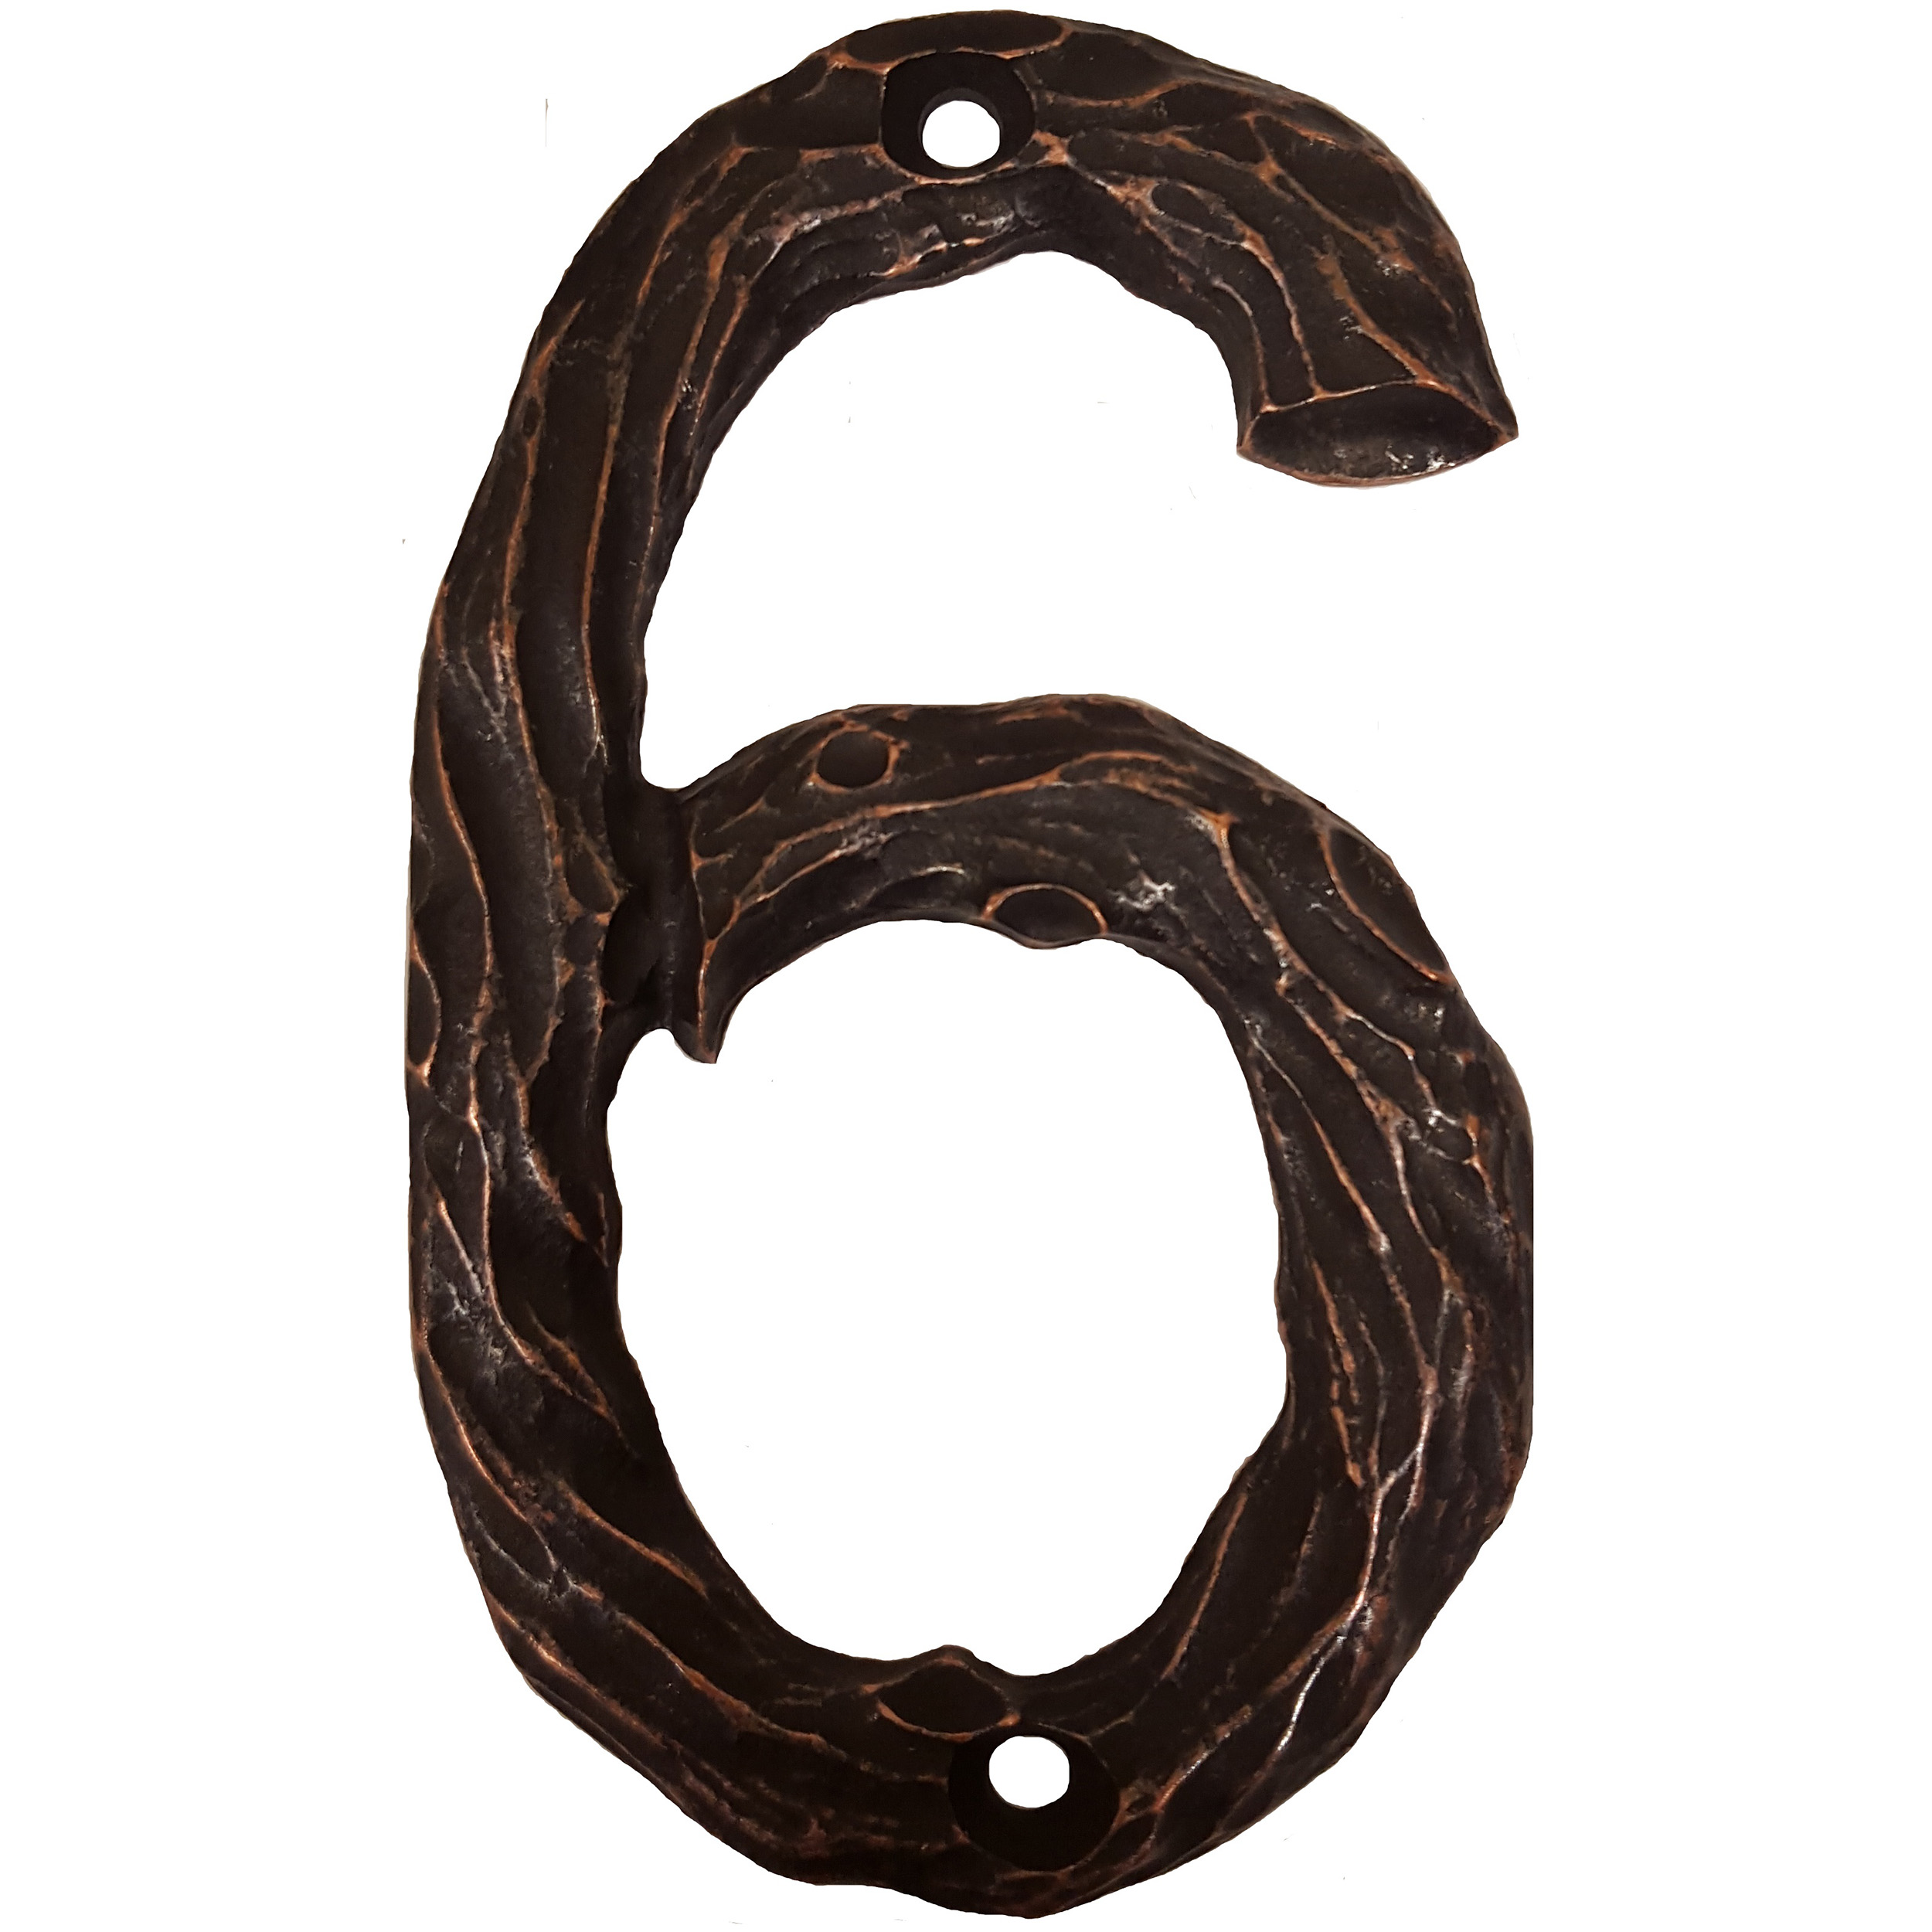 Lhn6-orb Log House Number 6, Oil Rubbed Bronze, 1 Piece